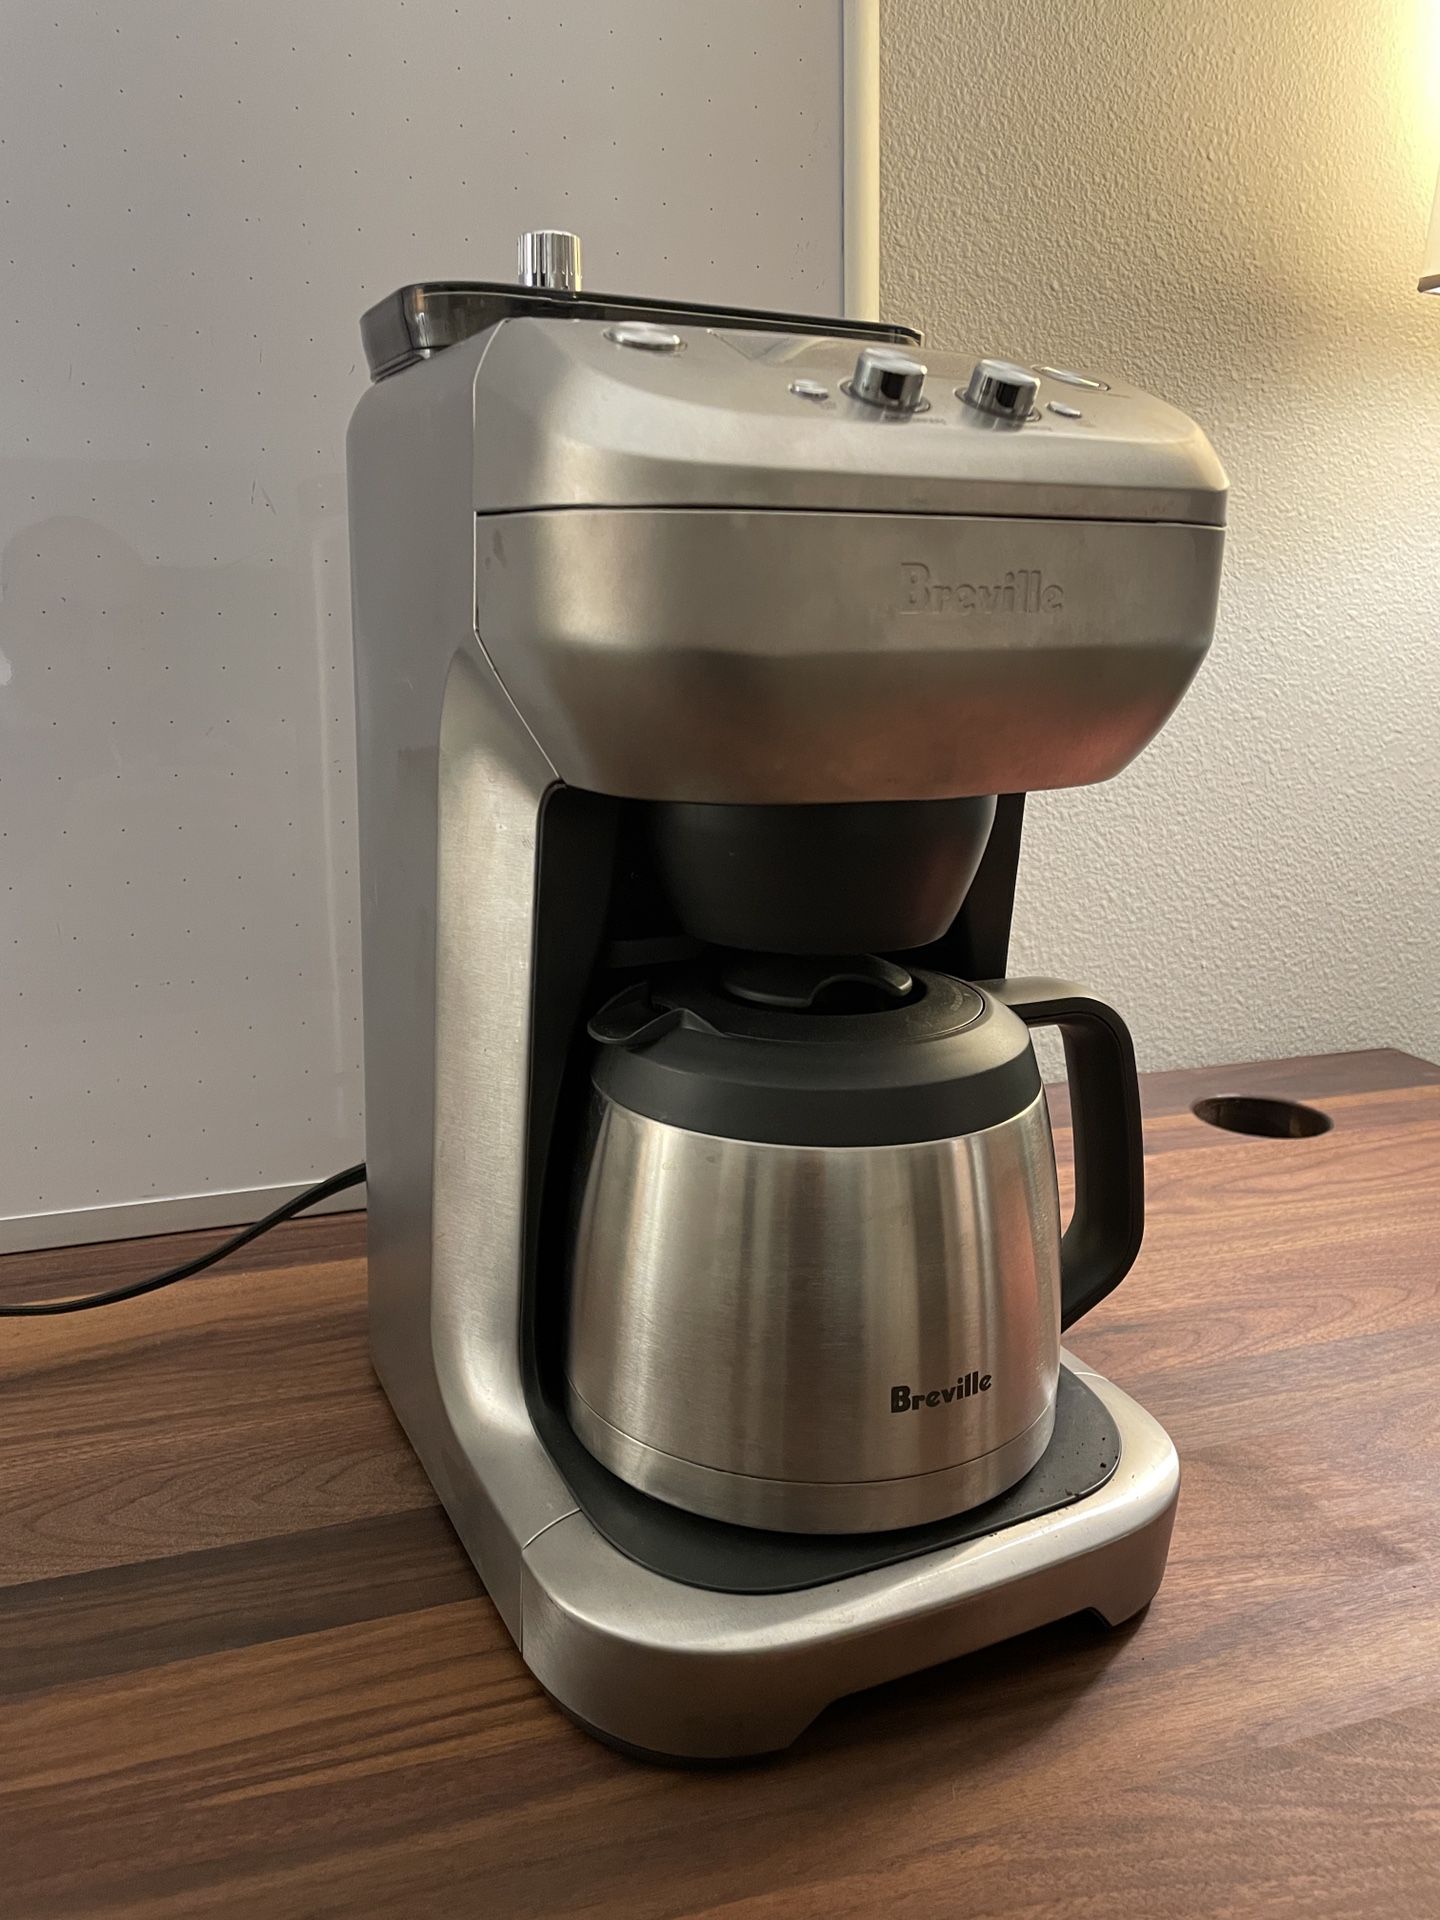 Breville Grind Control Coffee Maker, Brushed Stainless Steel, BDC650BSS